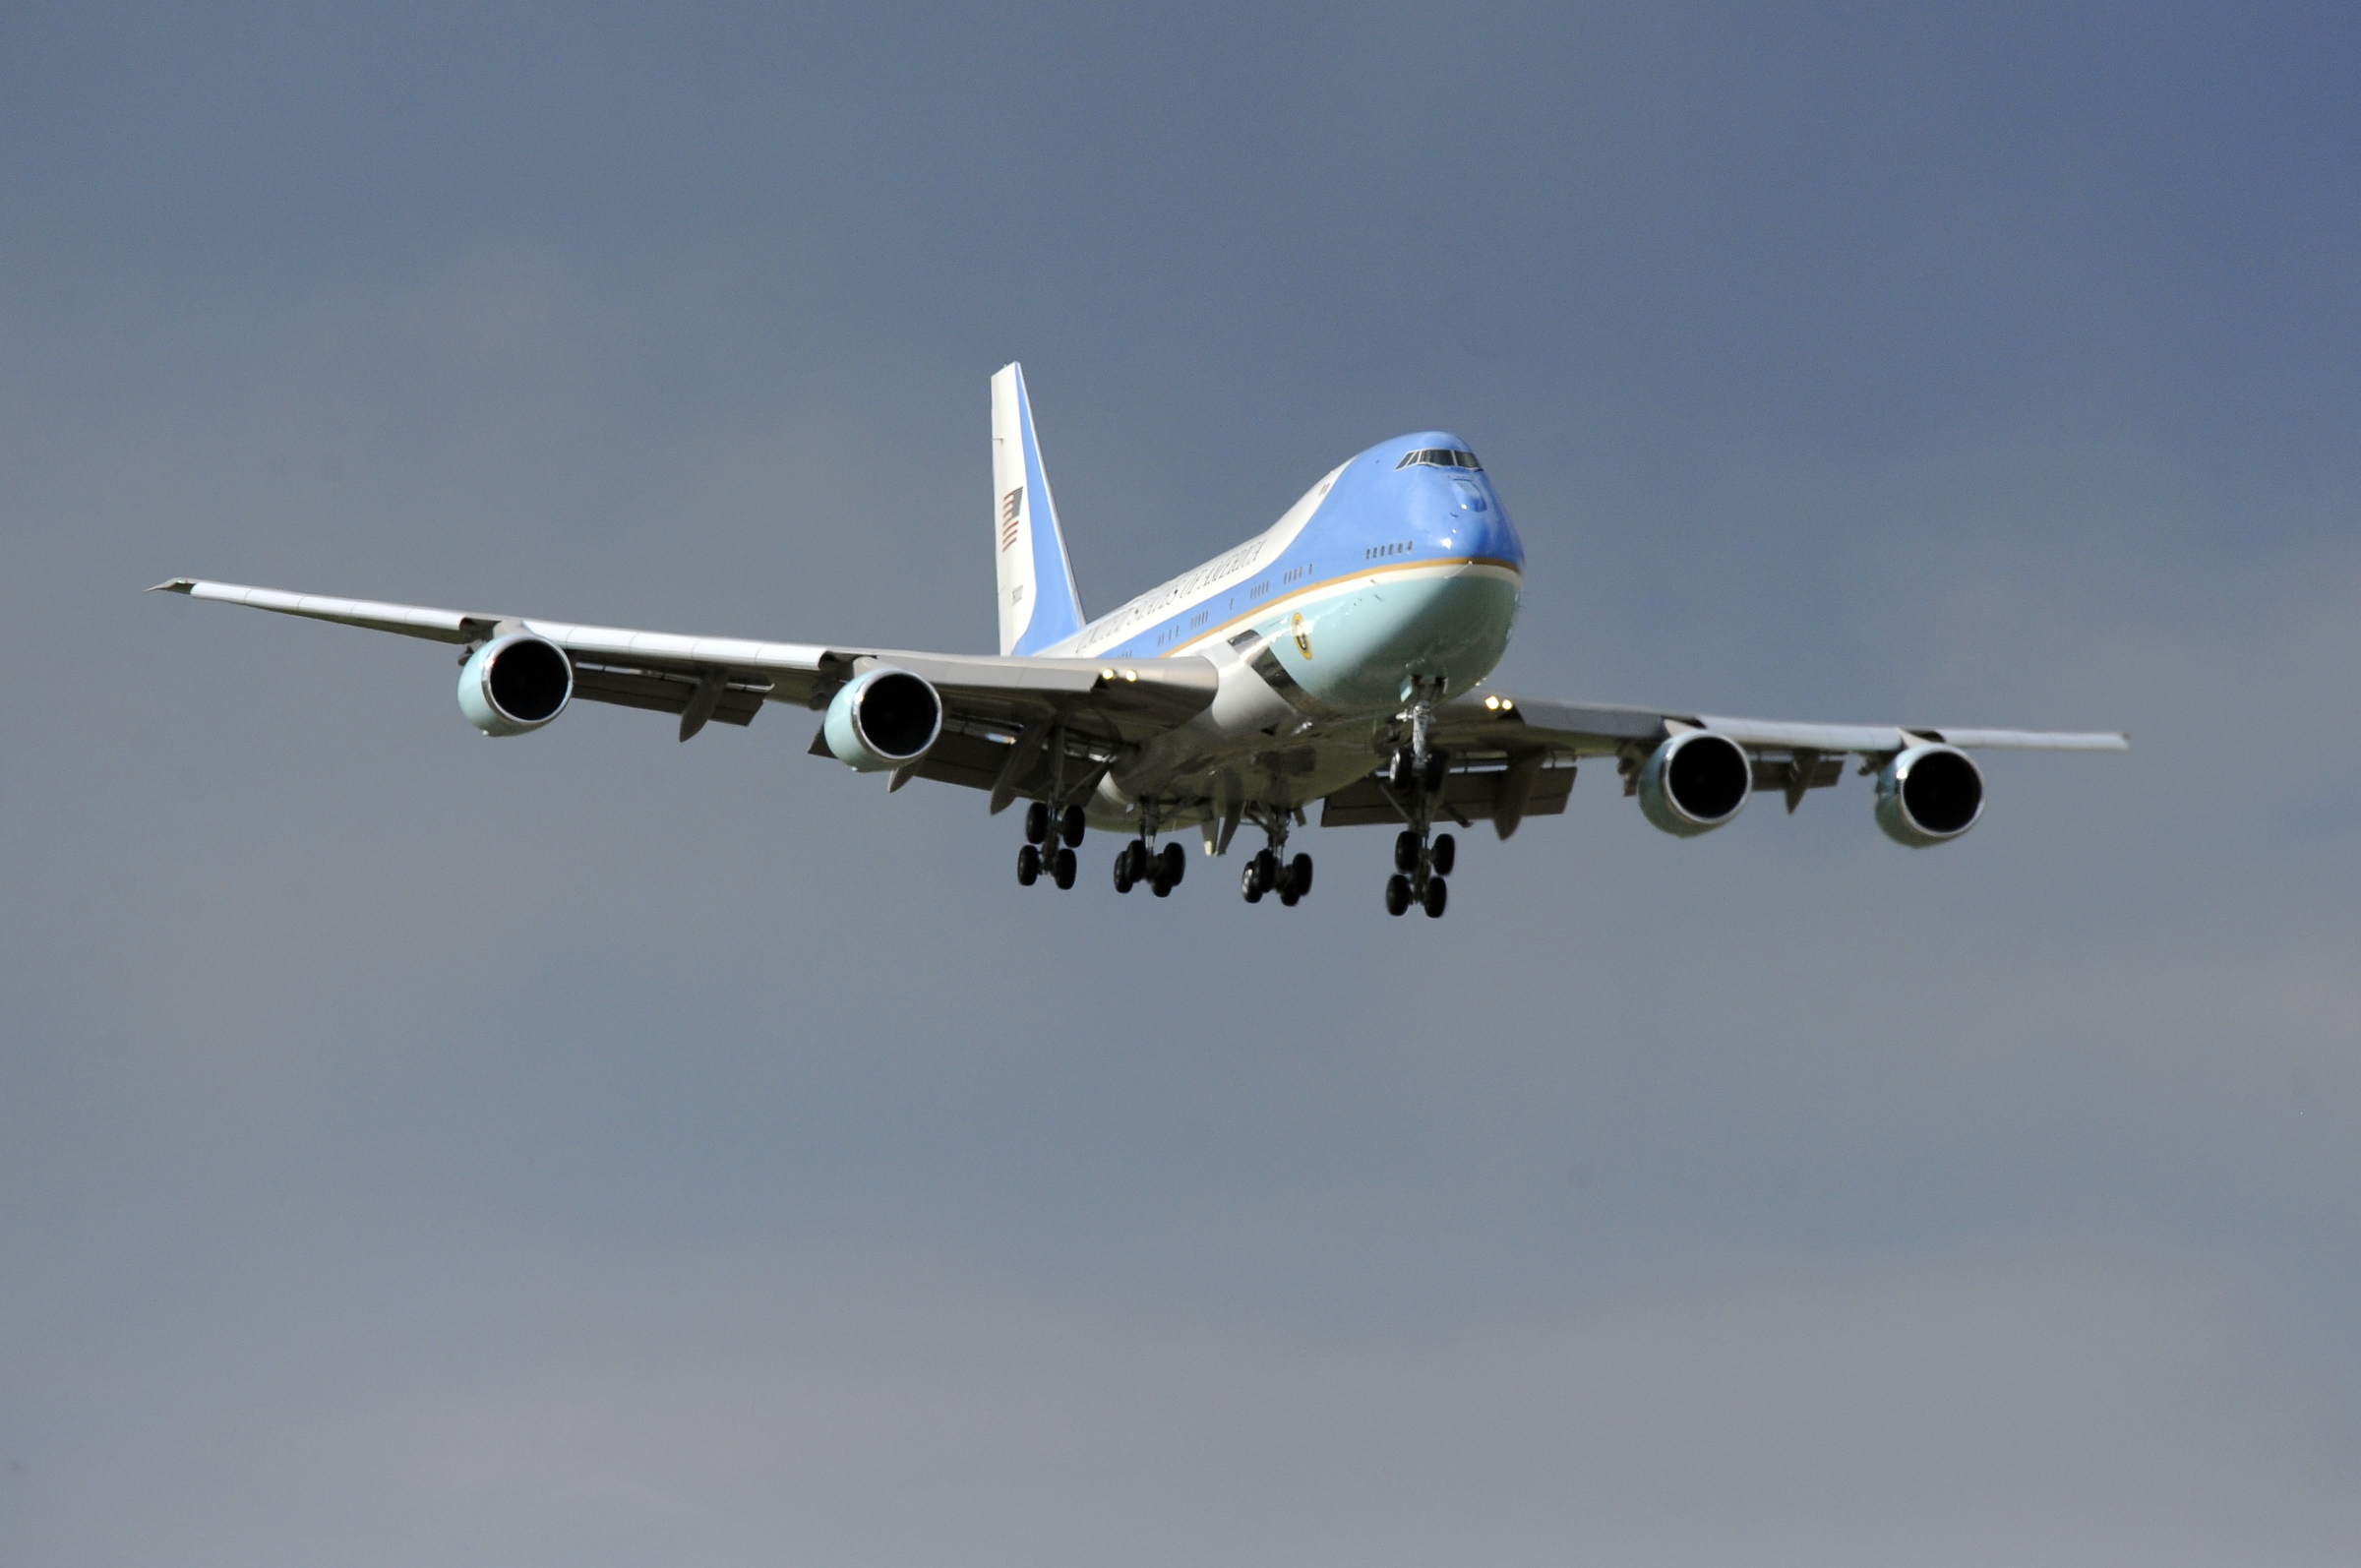 Air Force One: 8 Fascinating Facts About the President's Plane